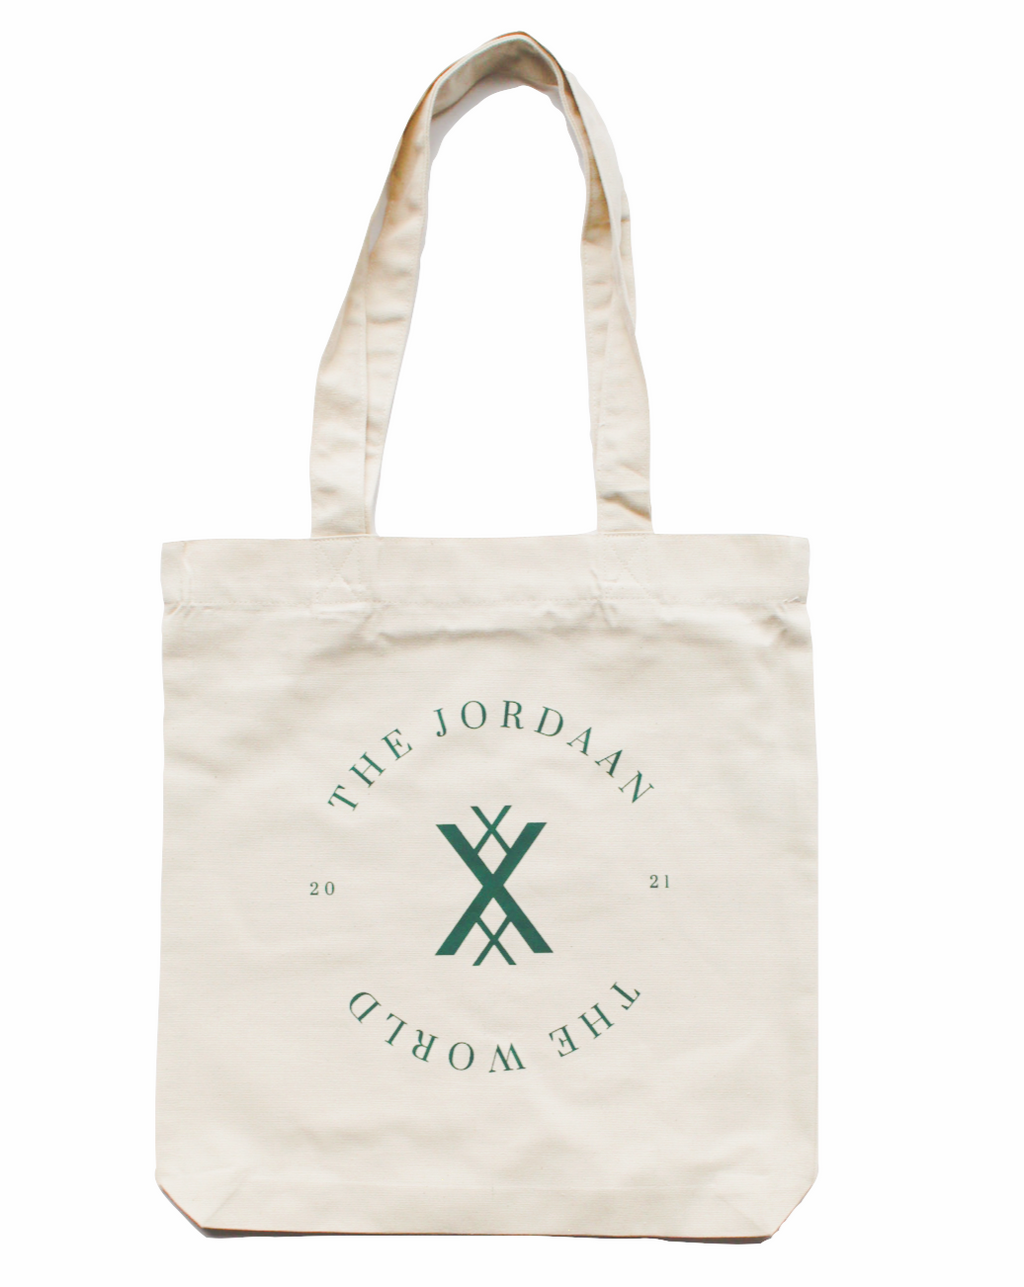 TOTE THE JORDAAN X THE WORLD